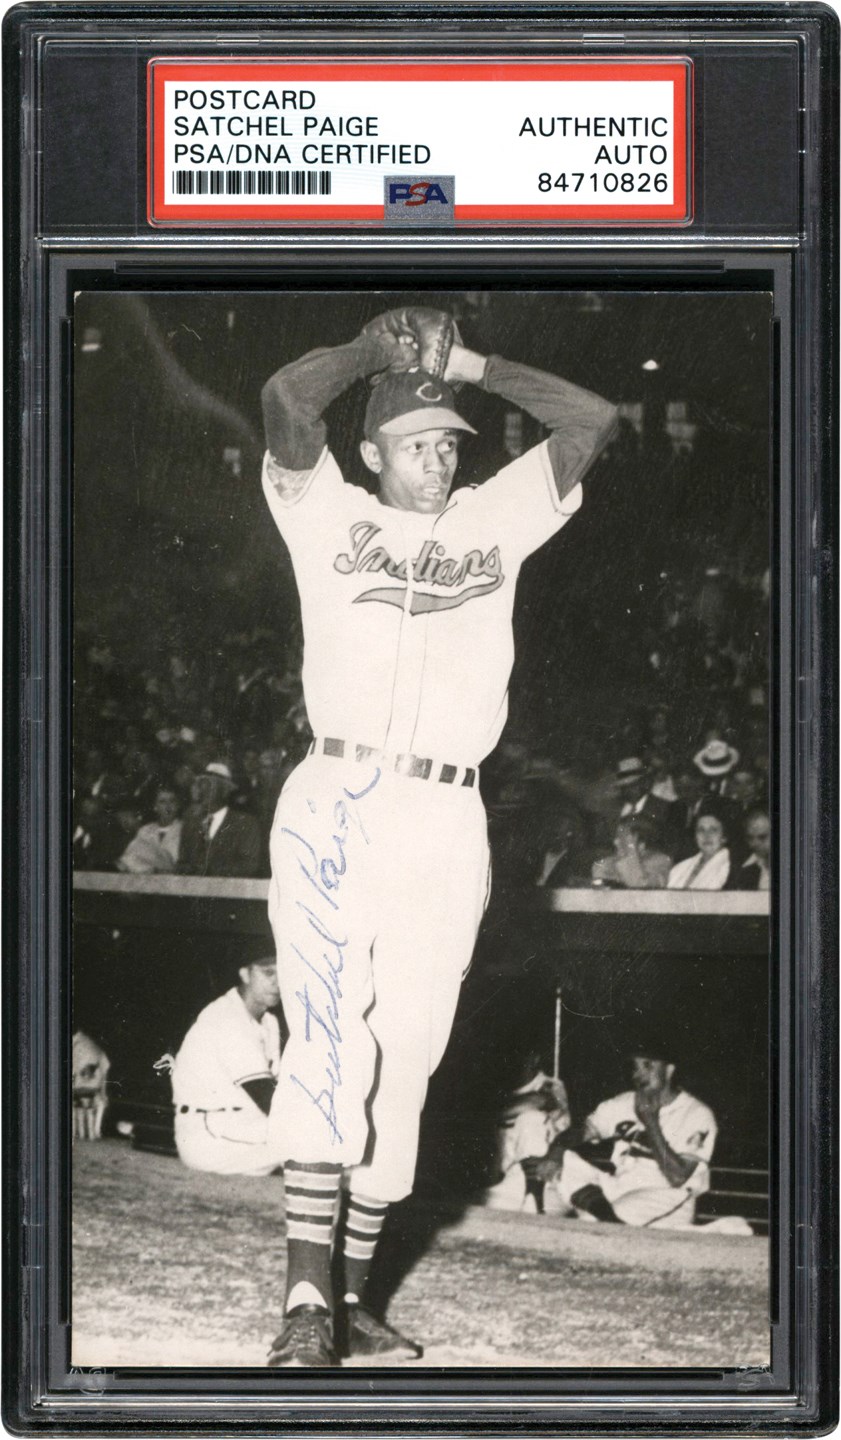 - Satchel Paige Signed Real Photo Postcard - Image Used for 1949 Team Picture Pack Photo (PSA)